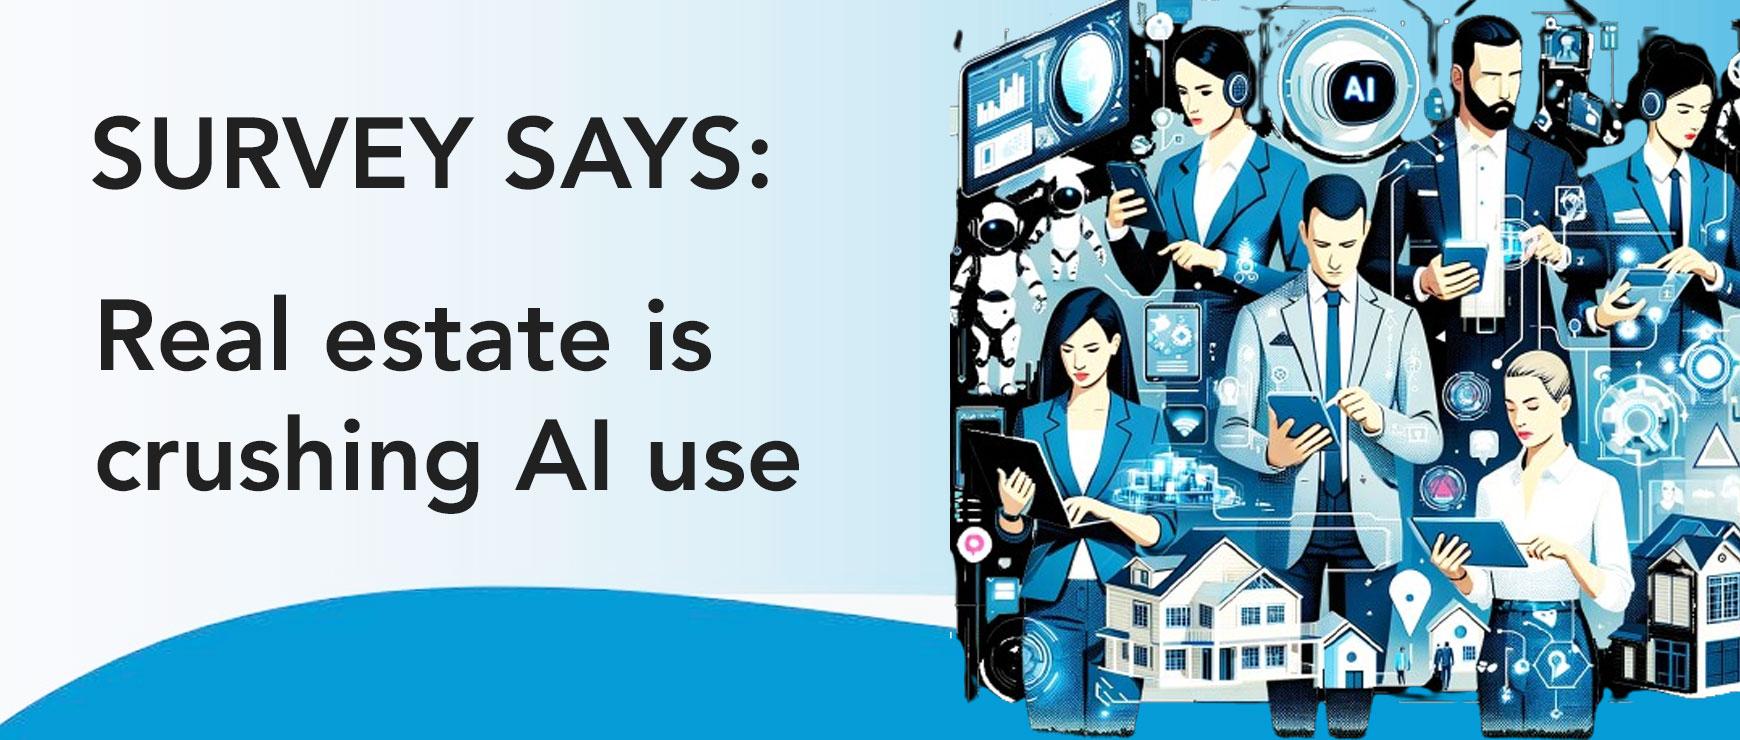 Survey says: Real estate is crushing AI use